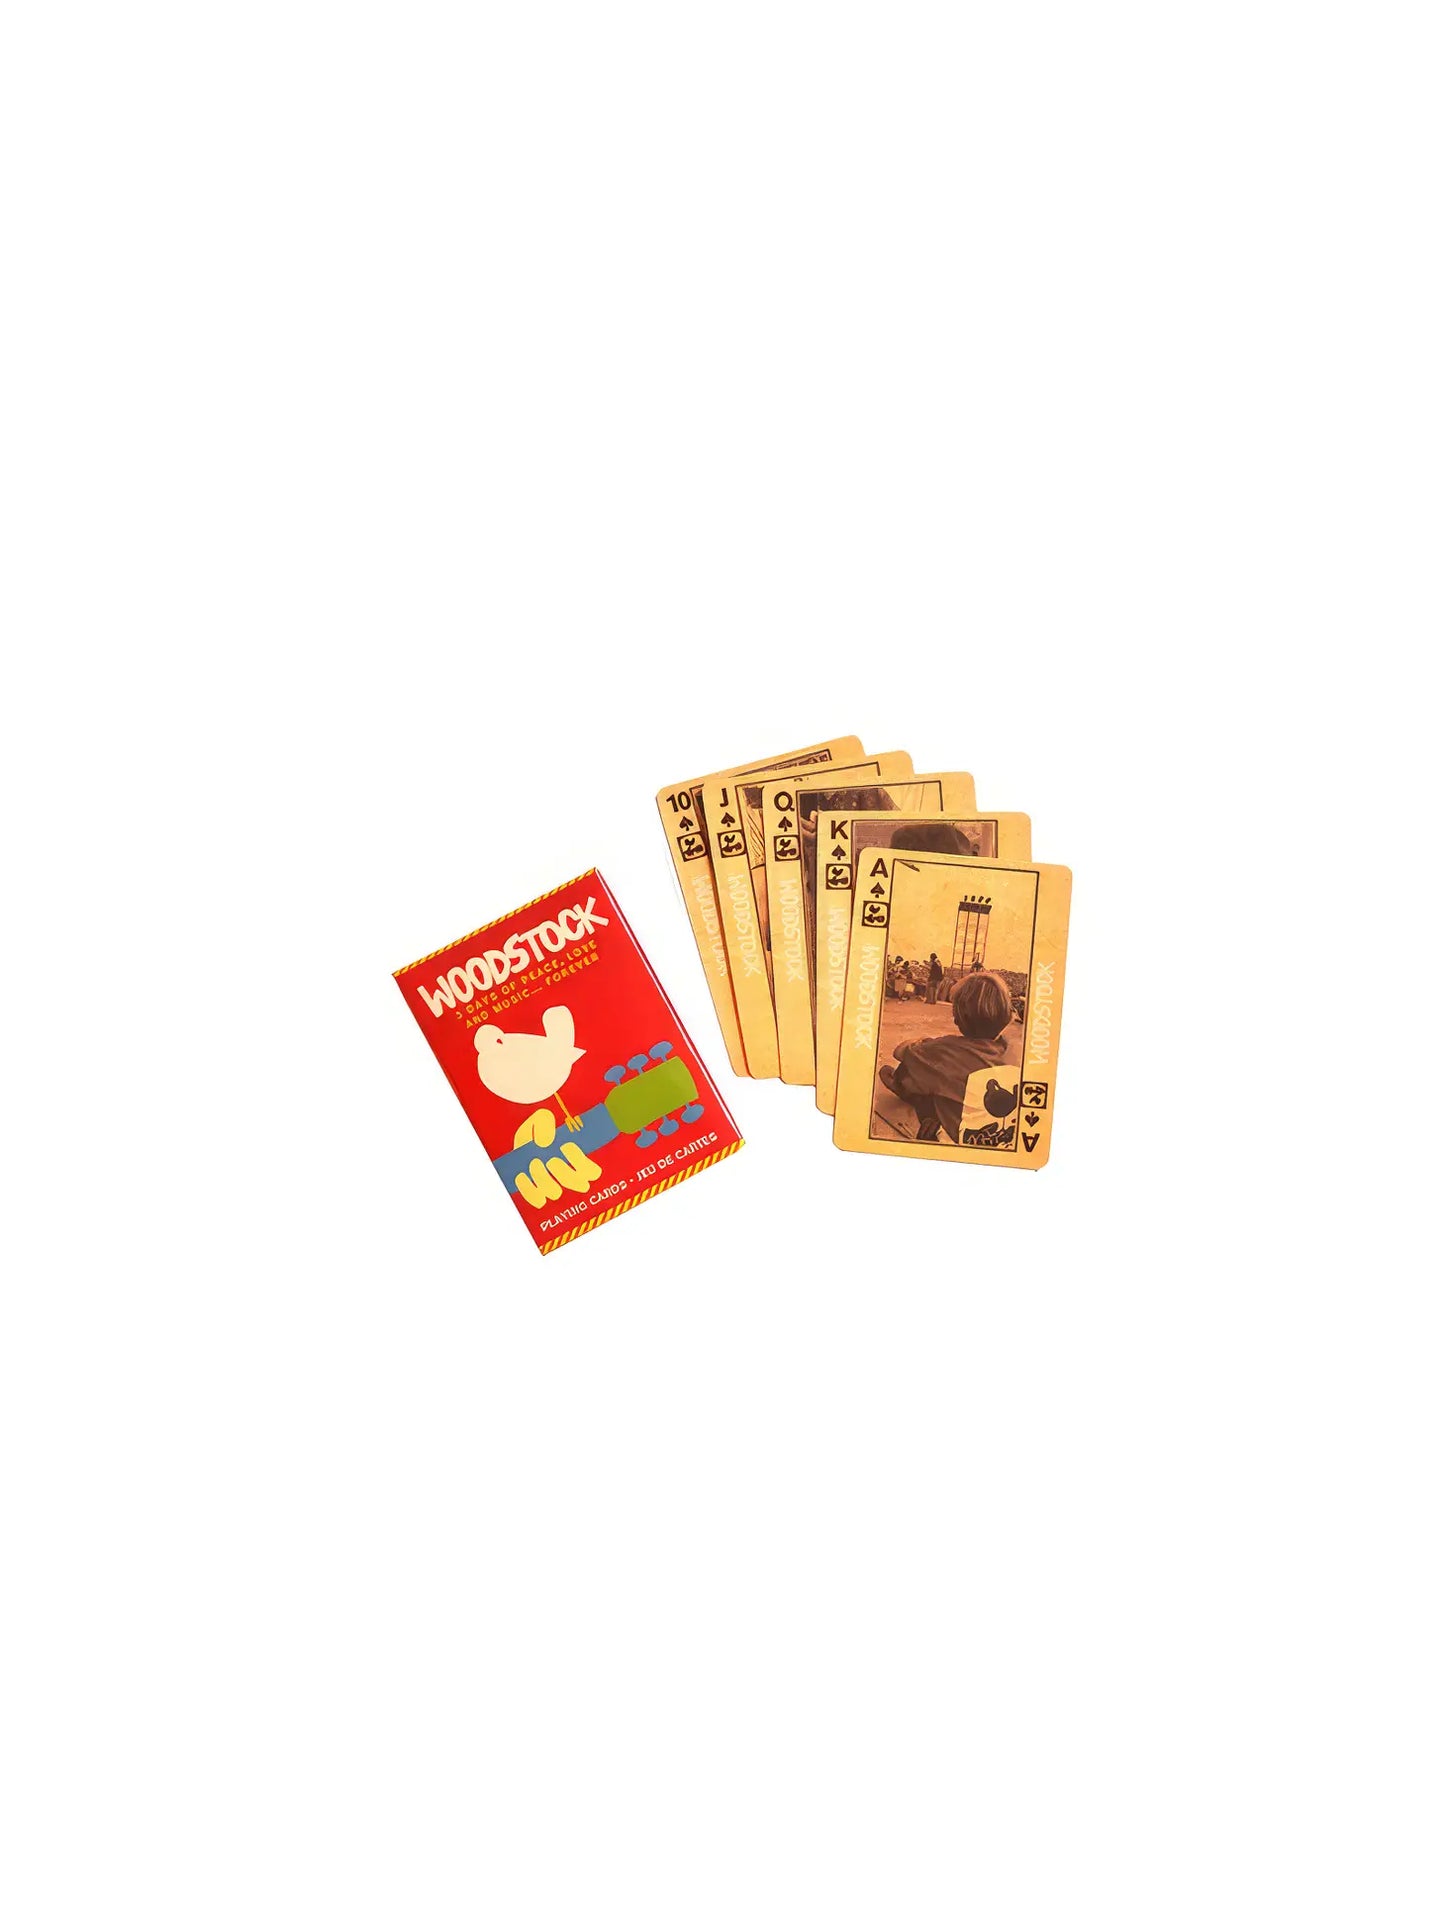 Woodstock Playing Cards by Hal Leonard and Aquarius - Relive the Legendary Festival